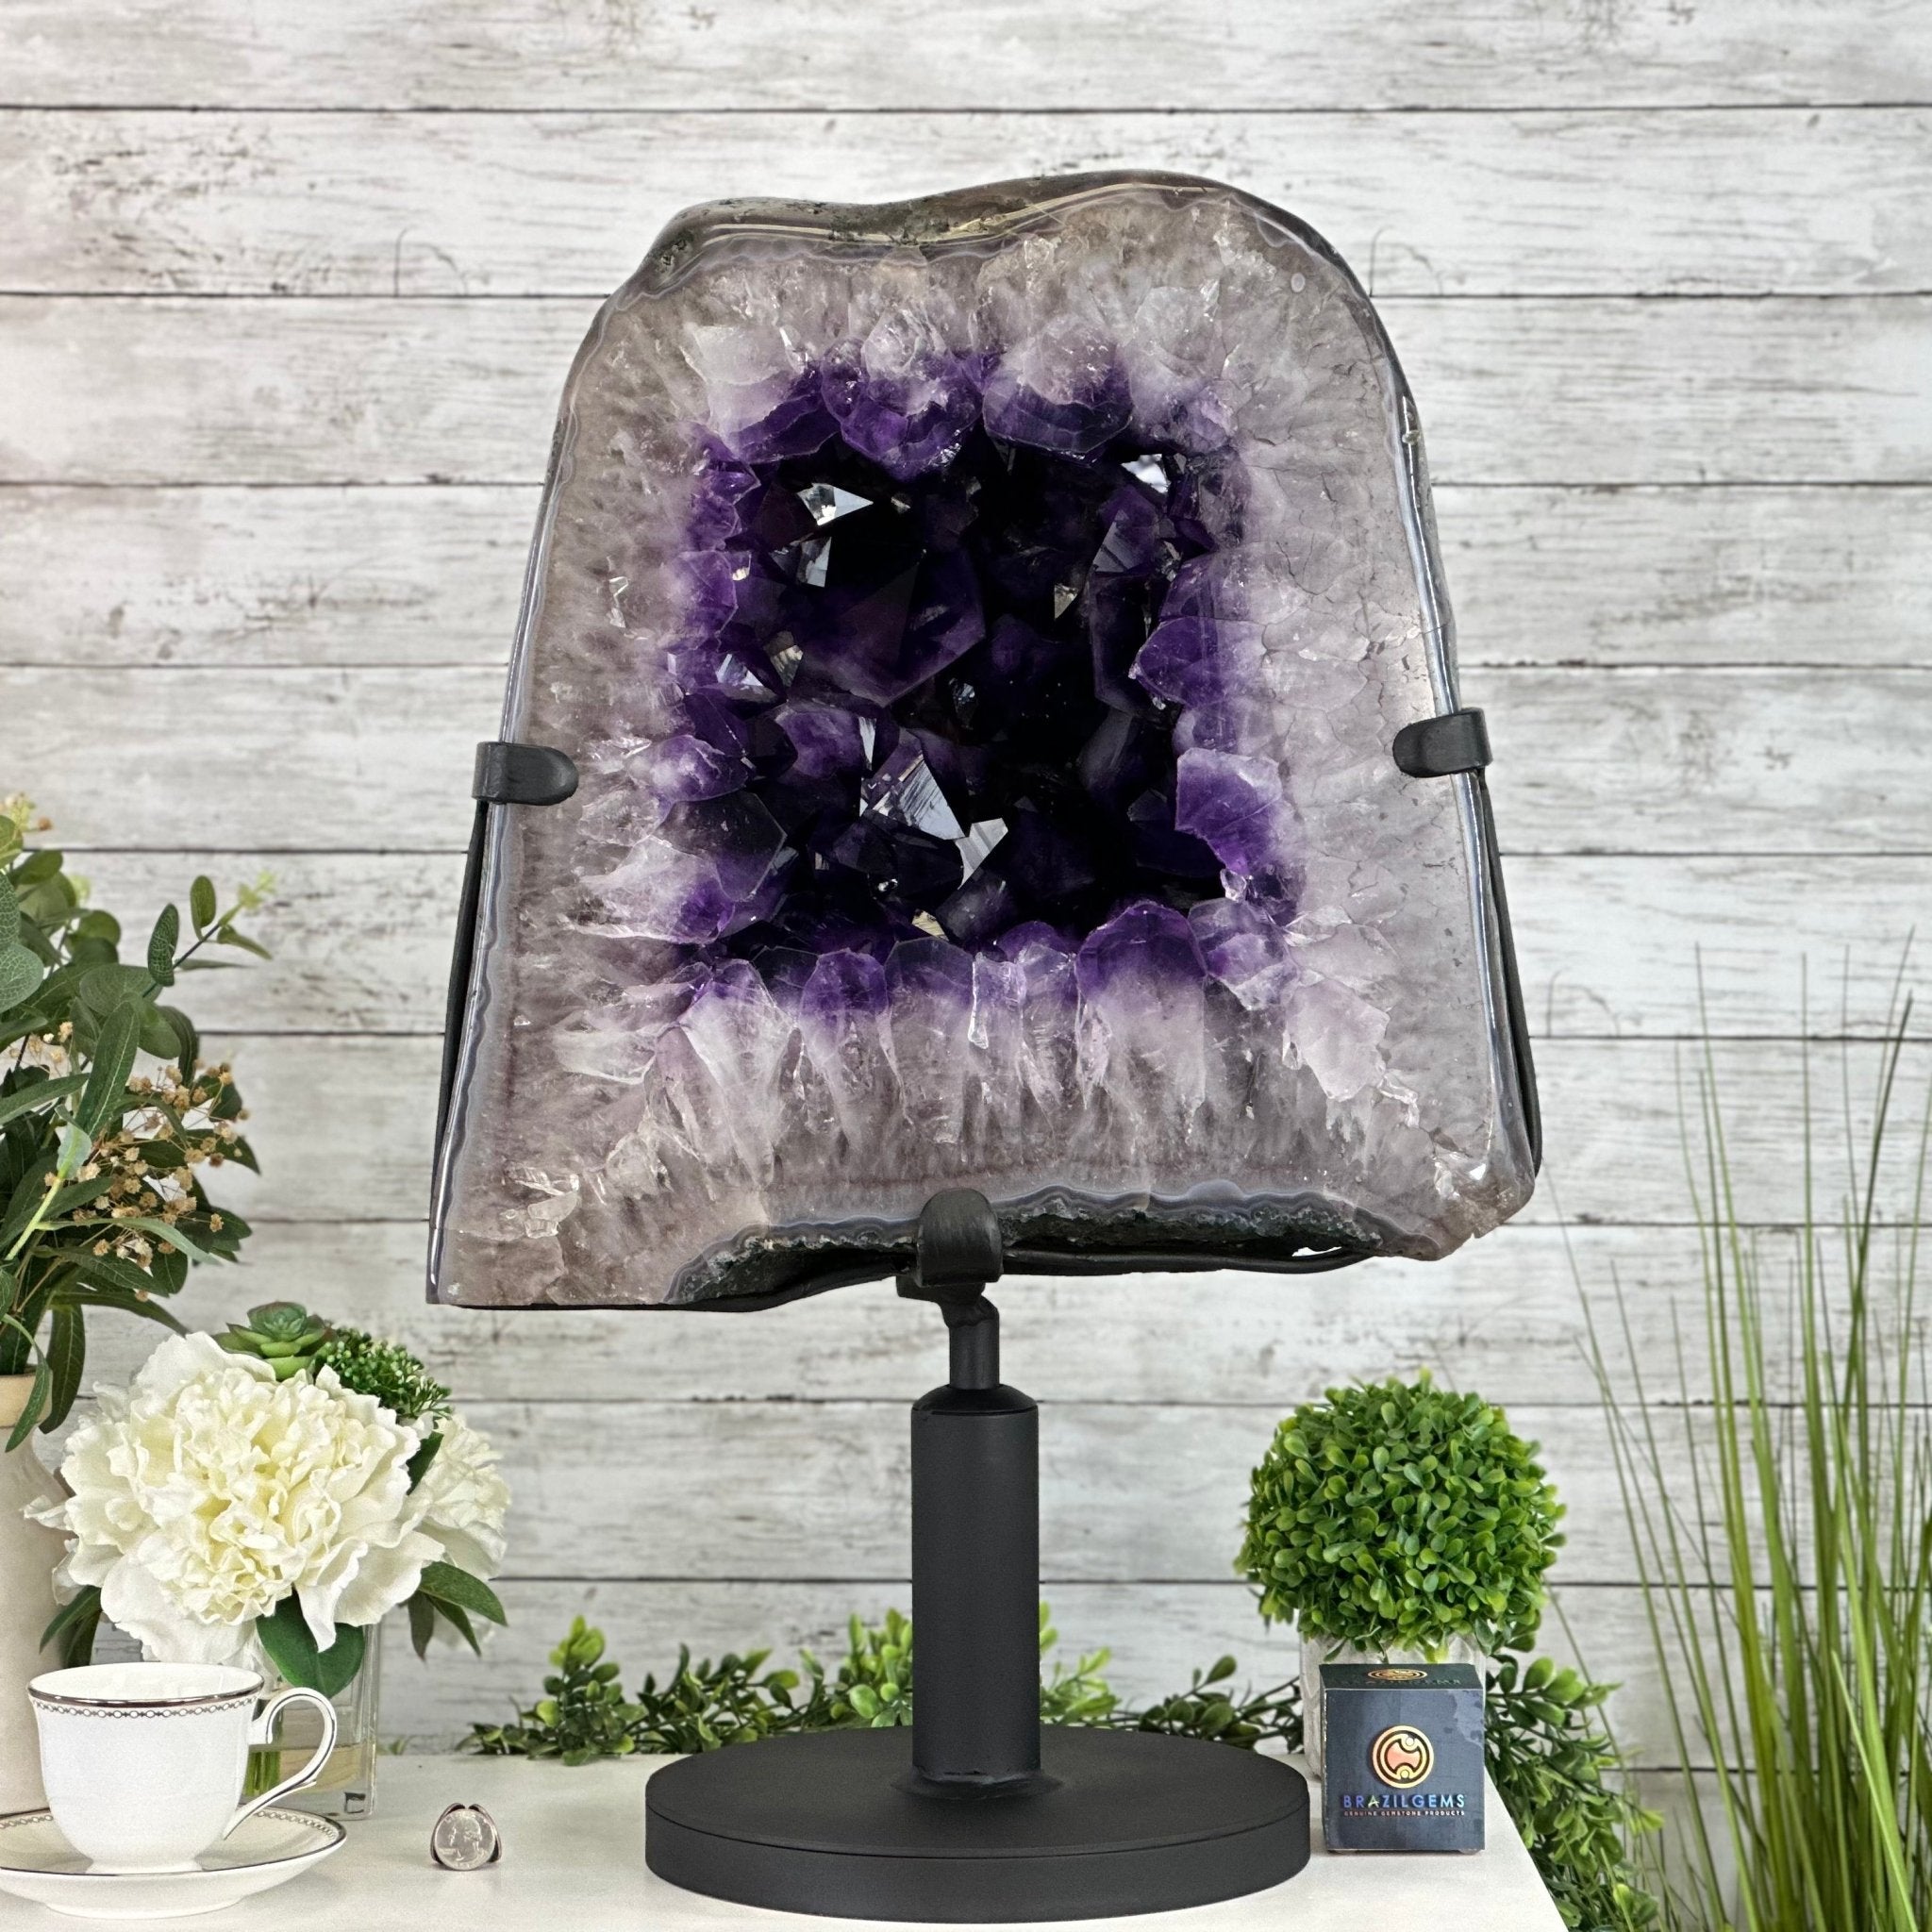 Super Quality Amethyst Cluster on Rotating Stand, 129.6 lbs & 26.2" Tall #5492 - 0031 - Brazil GemsBrazil GemsSuper Quality Amethyst Cluster on Rotating Stand, 129.6 lbs & 26.2" Tall #5492 - 0031Clusters on Rotating Bases5492 - 0031